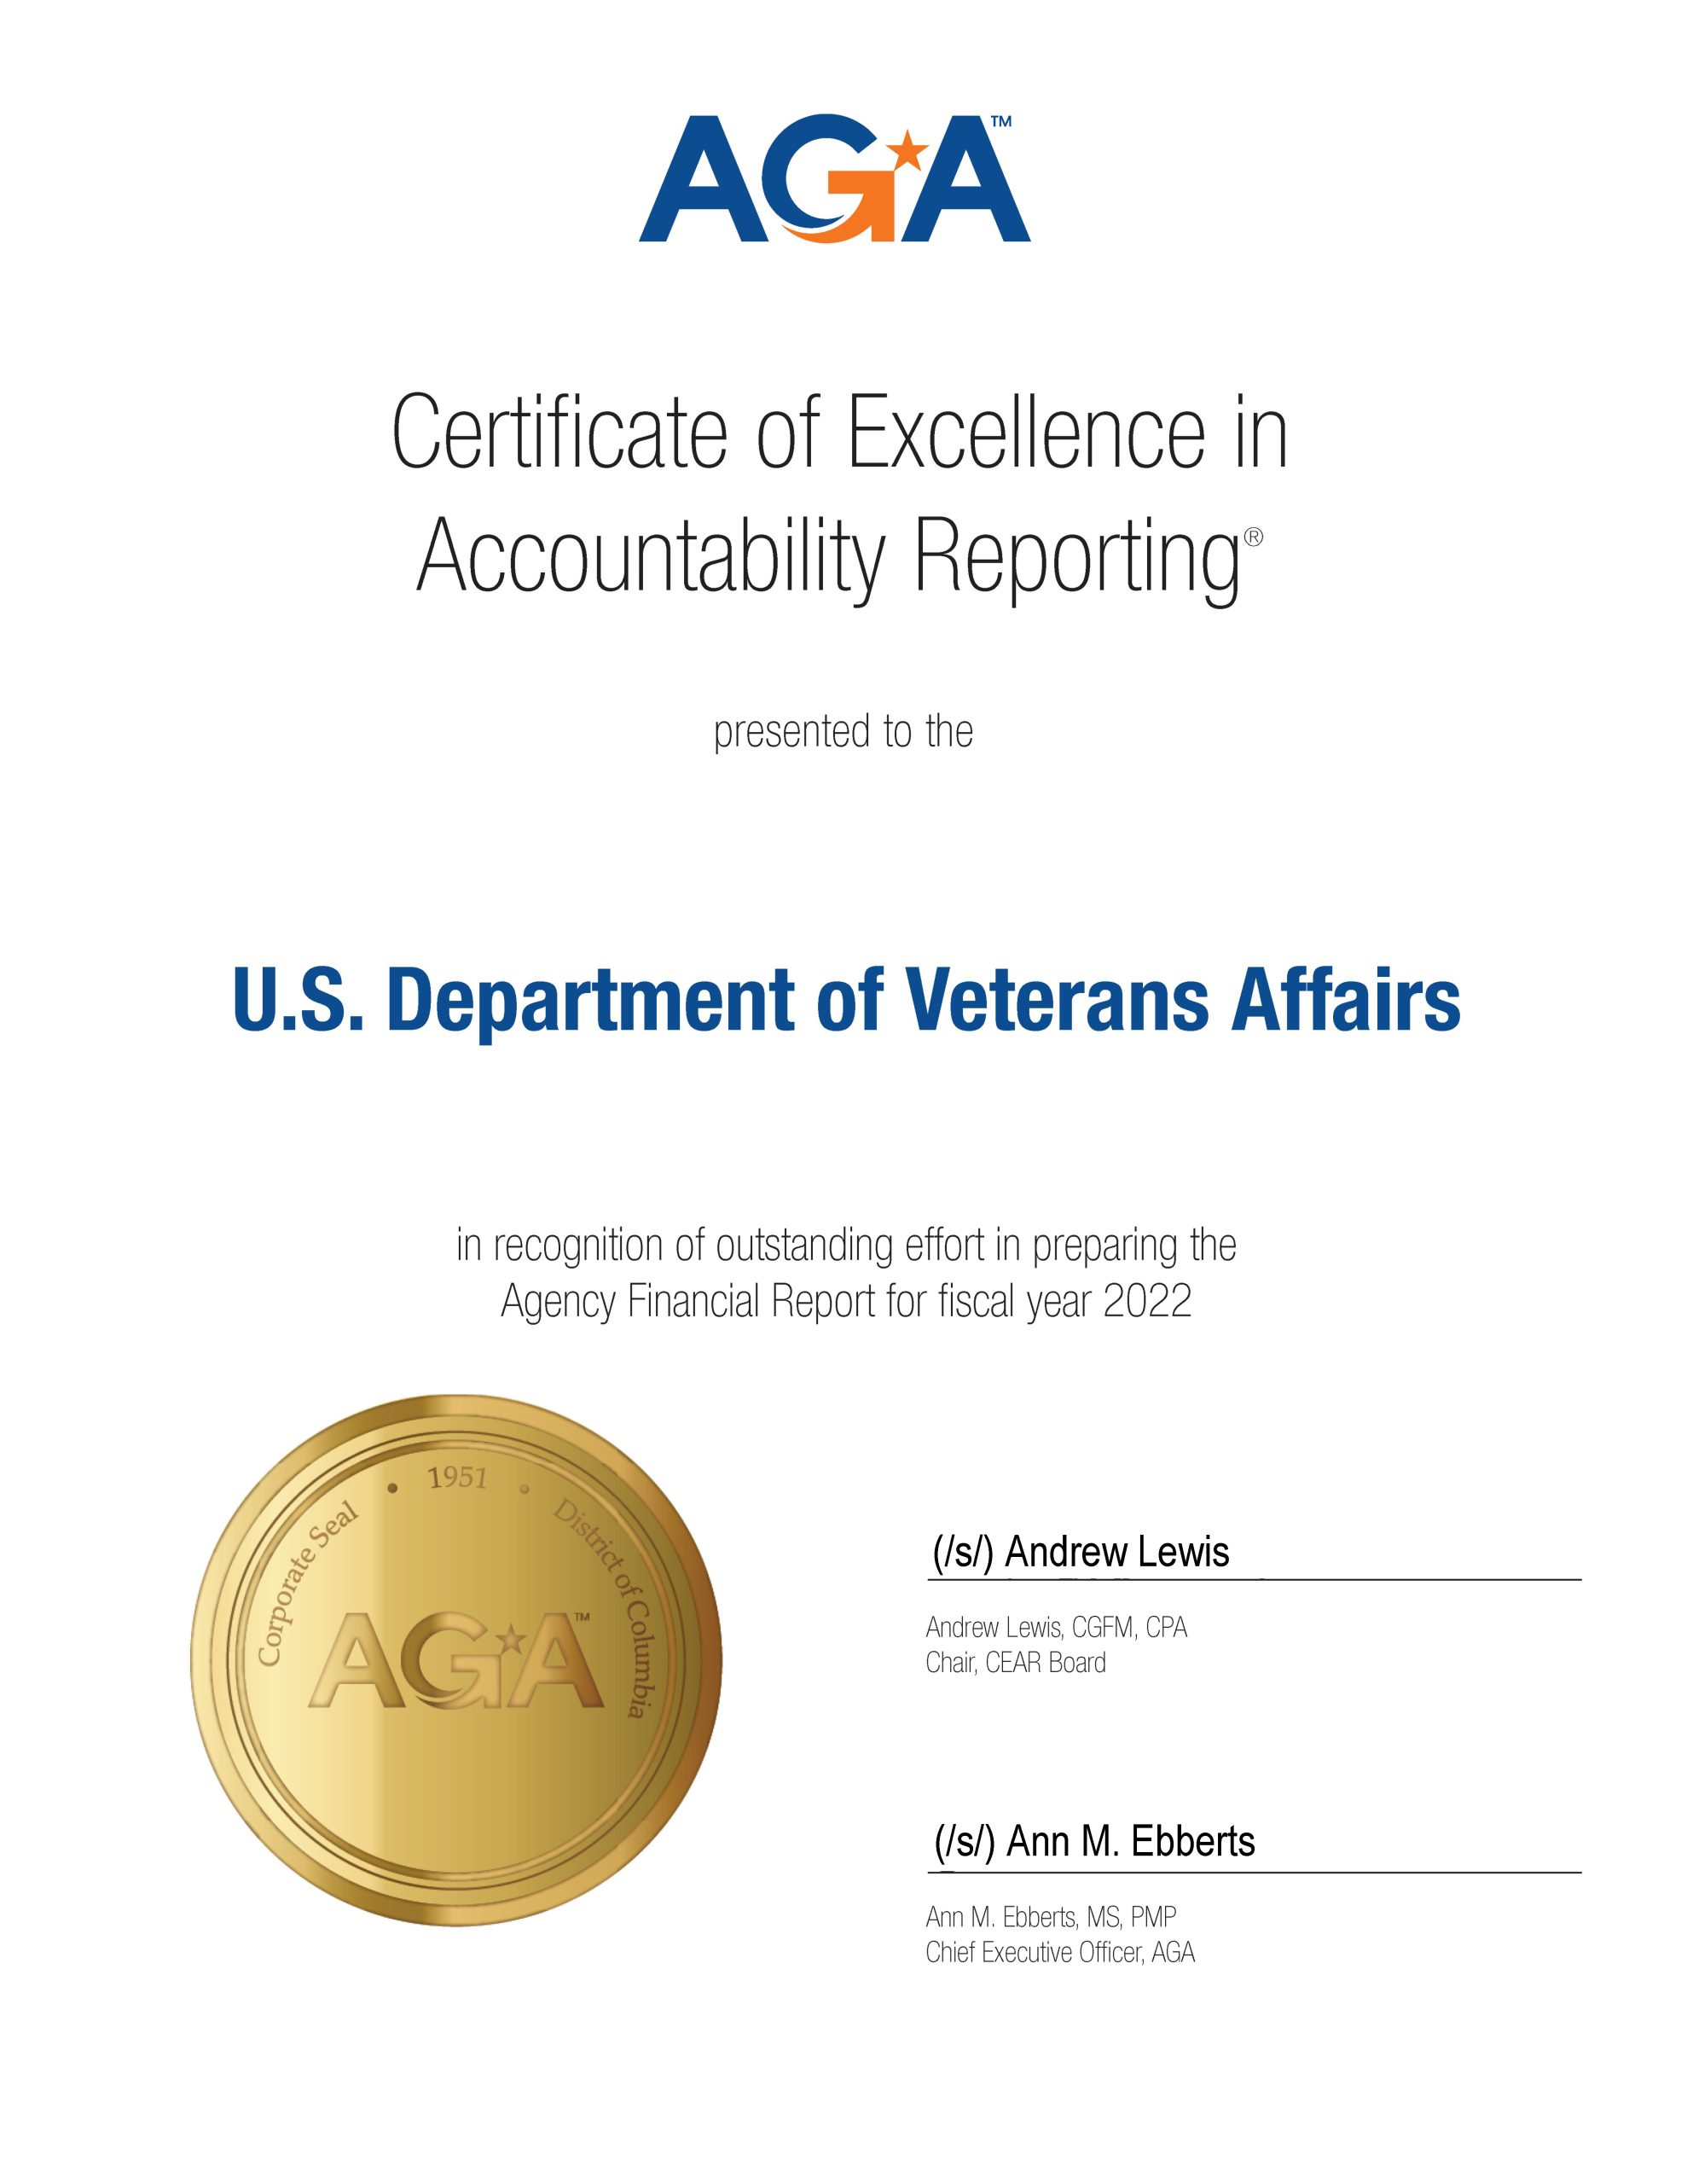 Image of the Certificate of Excellence in accountability Award for 2022